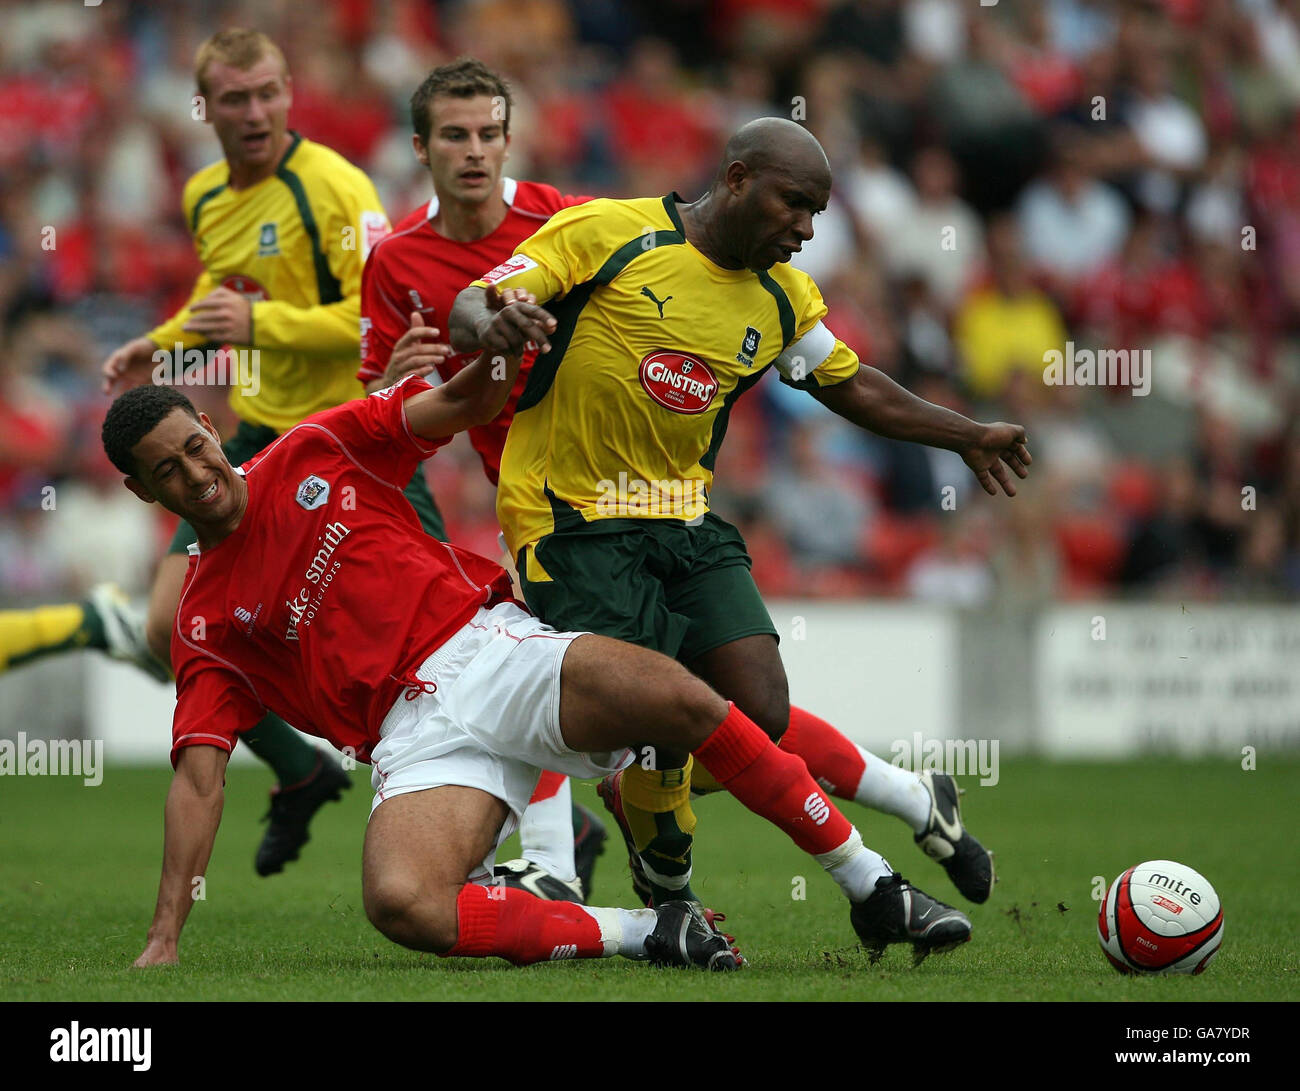 Barnsley's Lewin Nyatanga (left) tussles with Plymouth Argyle's Barry Hayles during the Coca-Cola Football League Championship match at the Oakwell Ground, Barnsley. Stock Photo